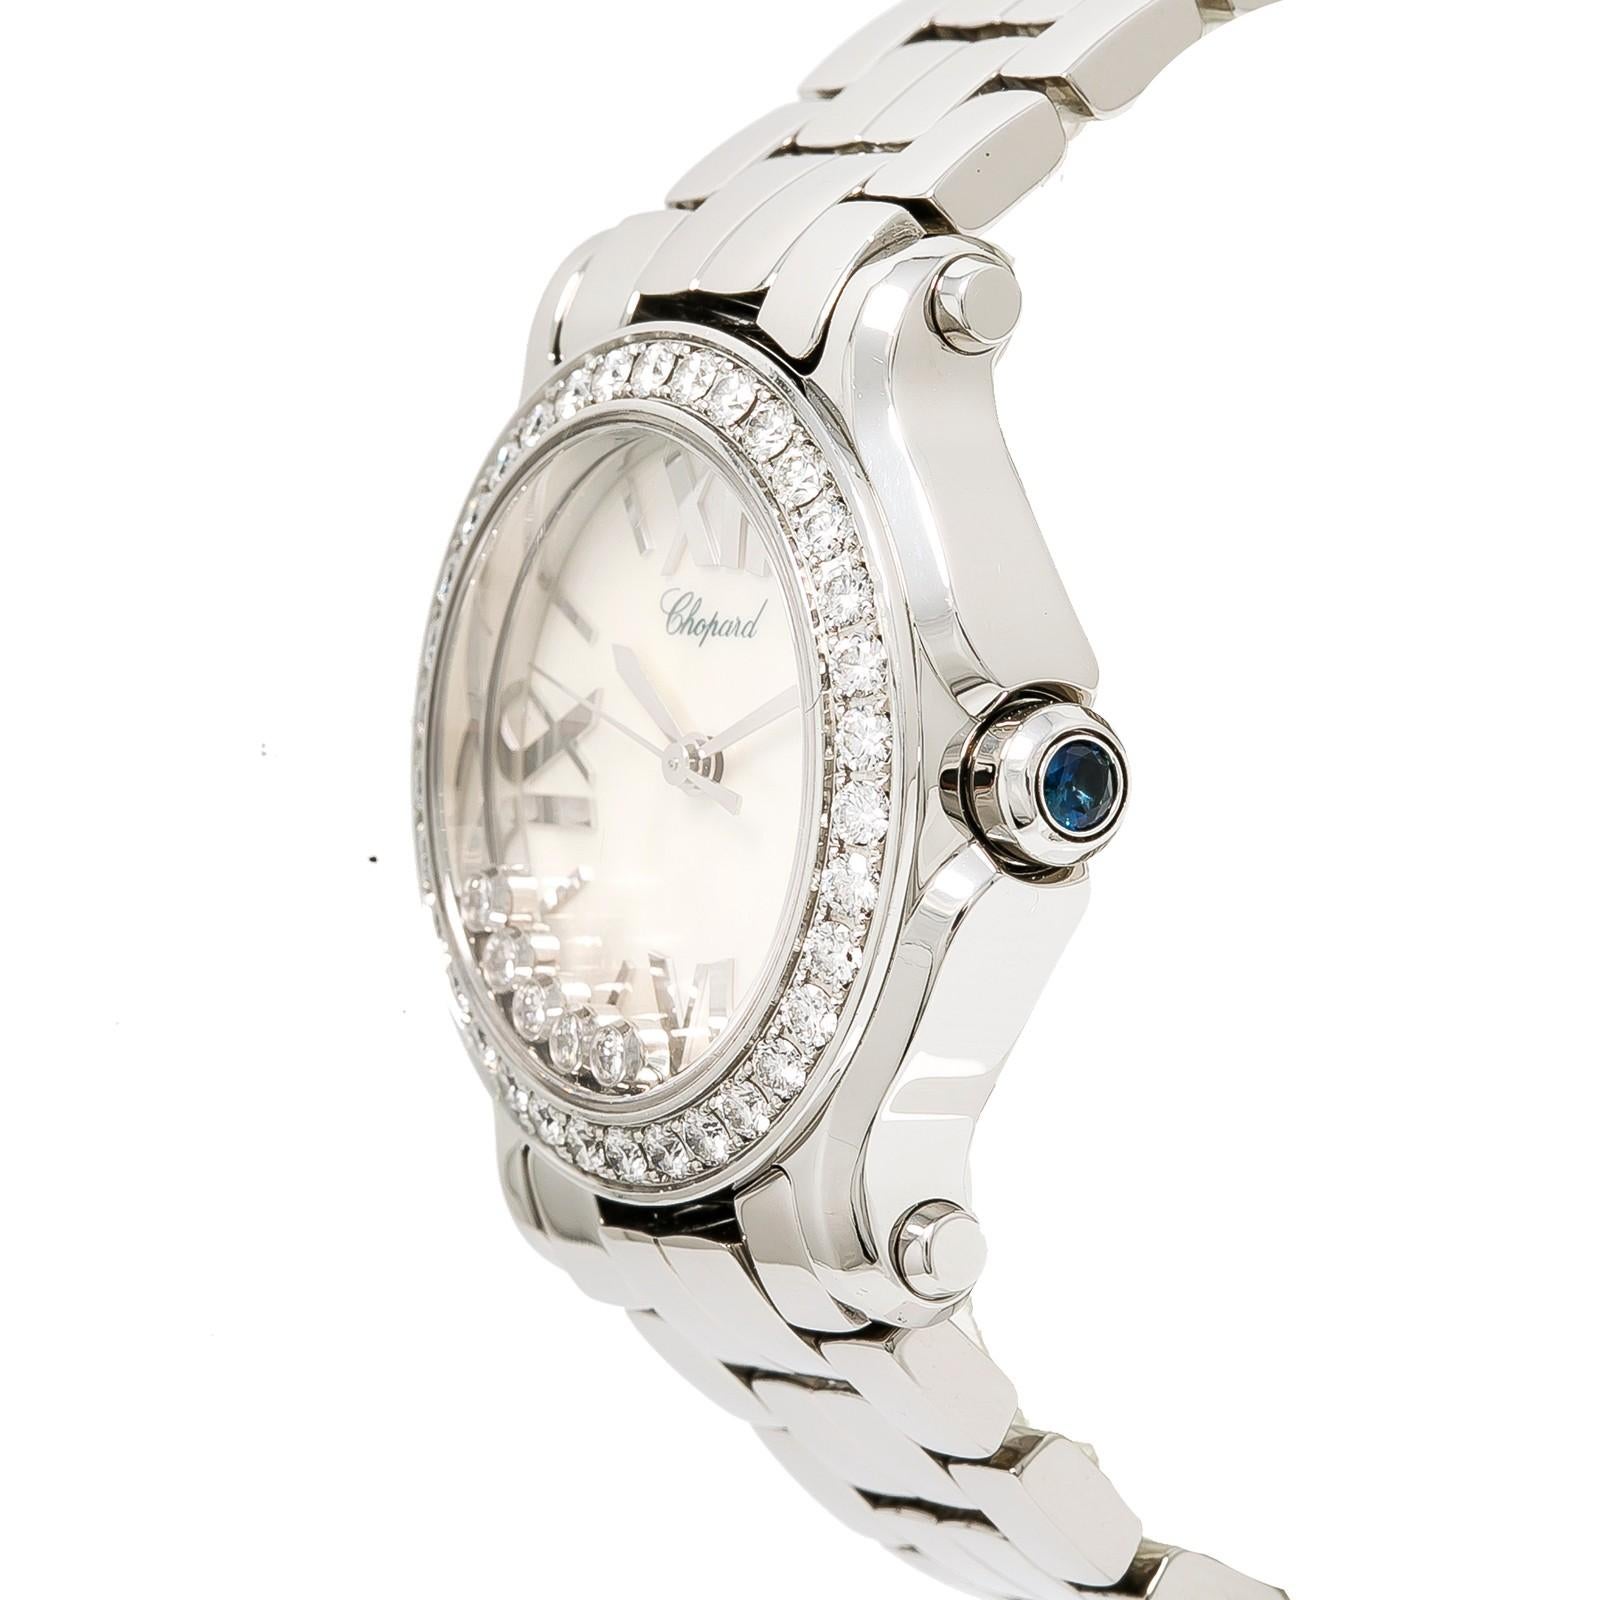 Chopard Happy Sport Reference #:278509-3010. CHOPARD HAPPY SPORT 8509 WOMENS QUARTZ WATCH STAINLESS STEEL MOP DIAL DIAMOND BEZEL 30MMF. Verified and Certified by WatchFacts. 1 year warranty offered by WatchFacts.